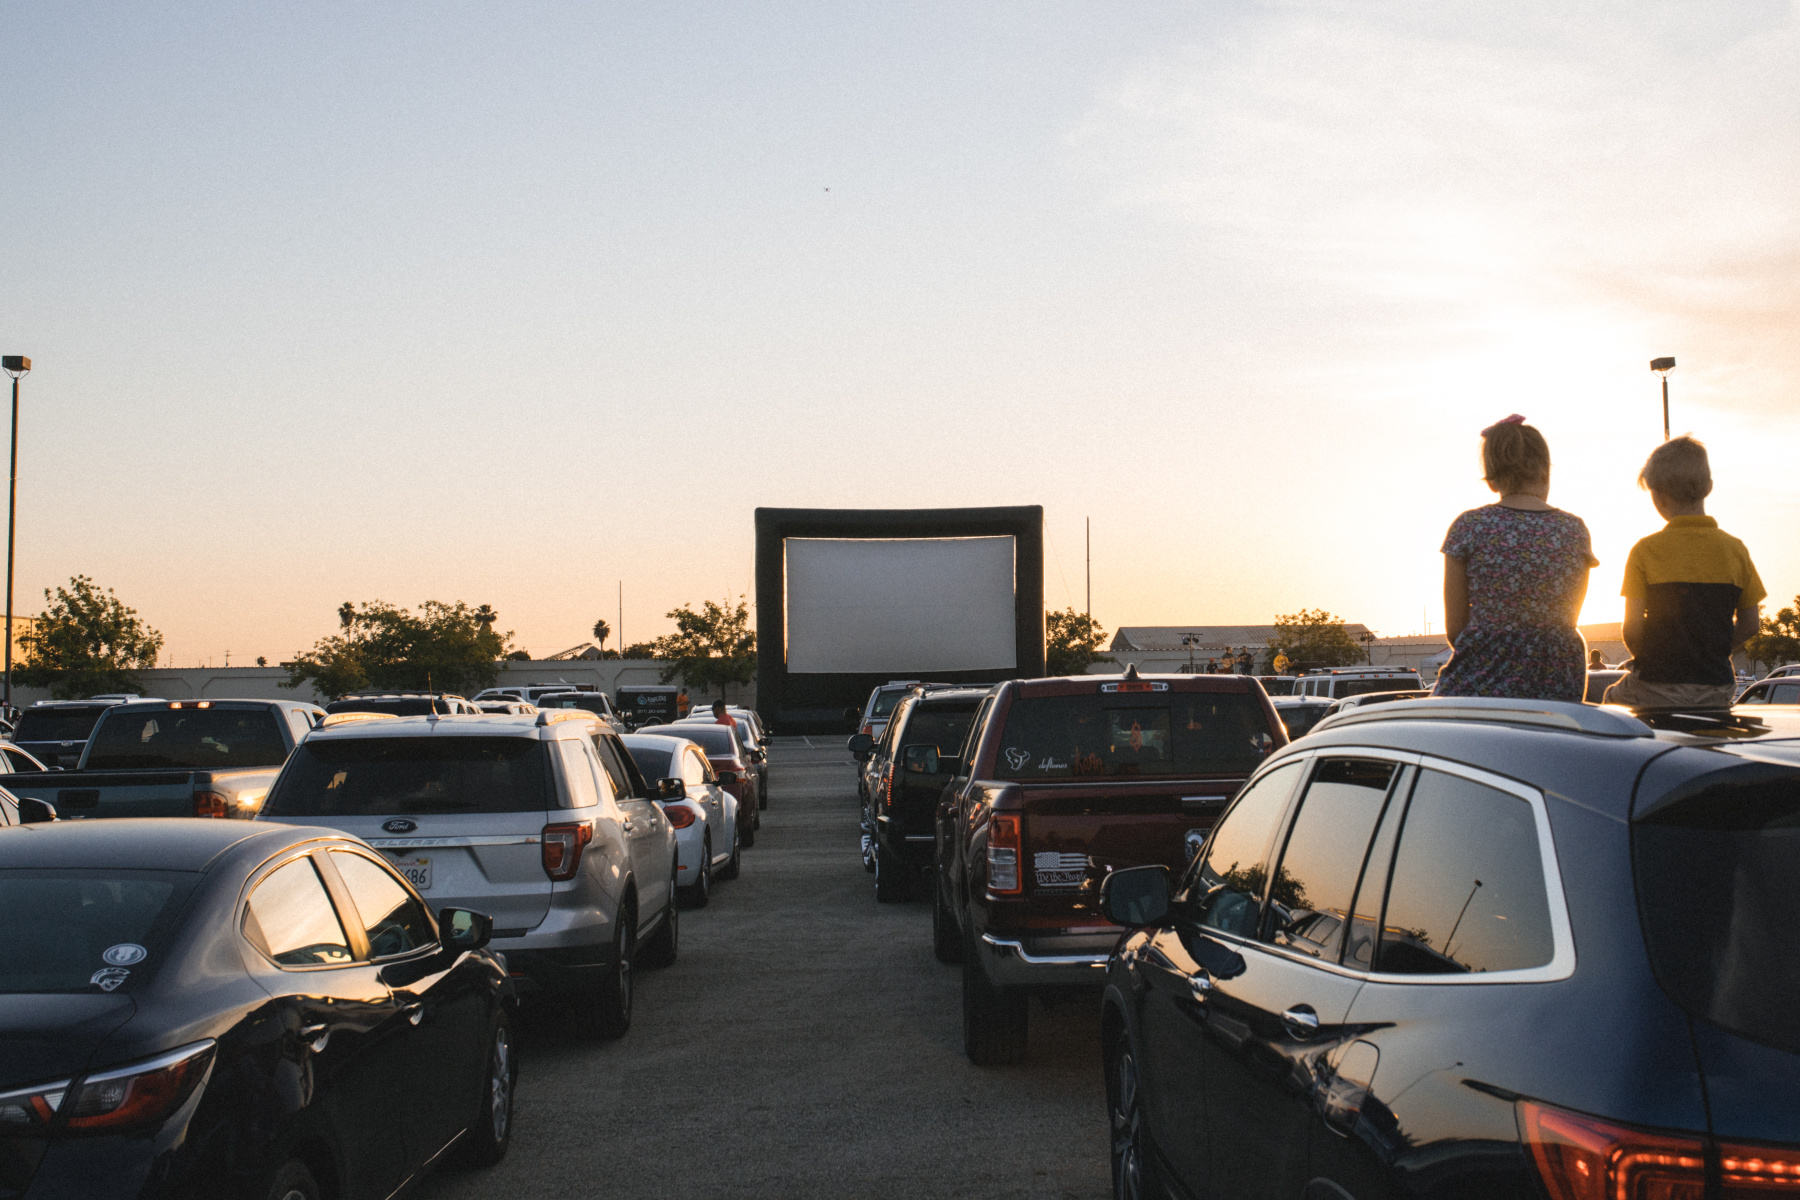 Kids at the Drive-In movie at sunset